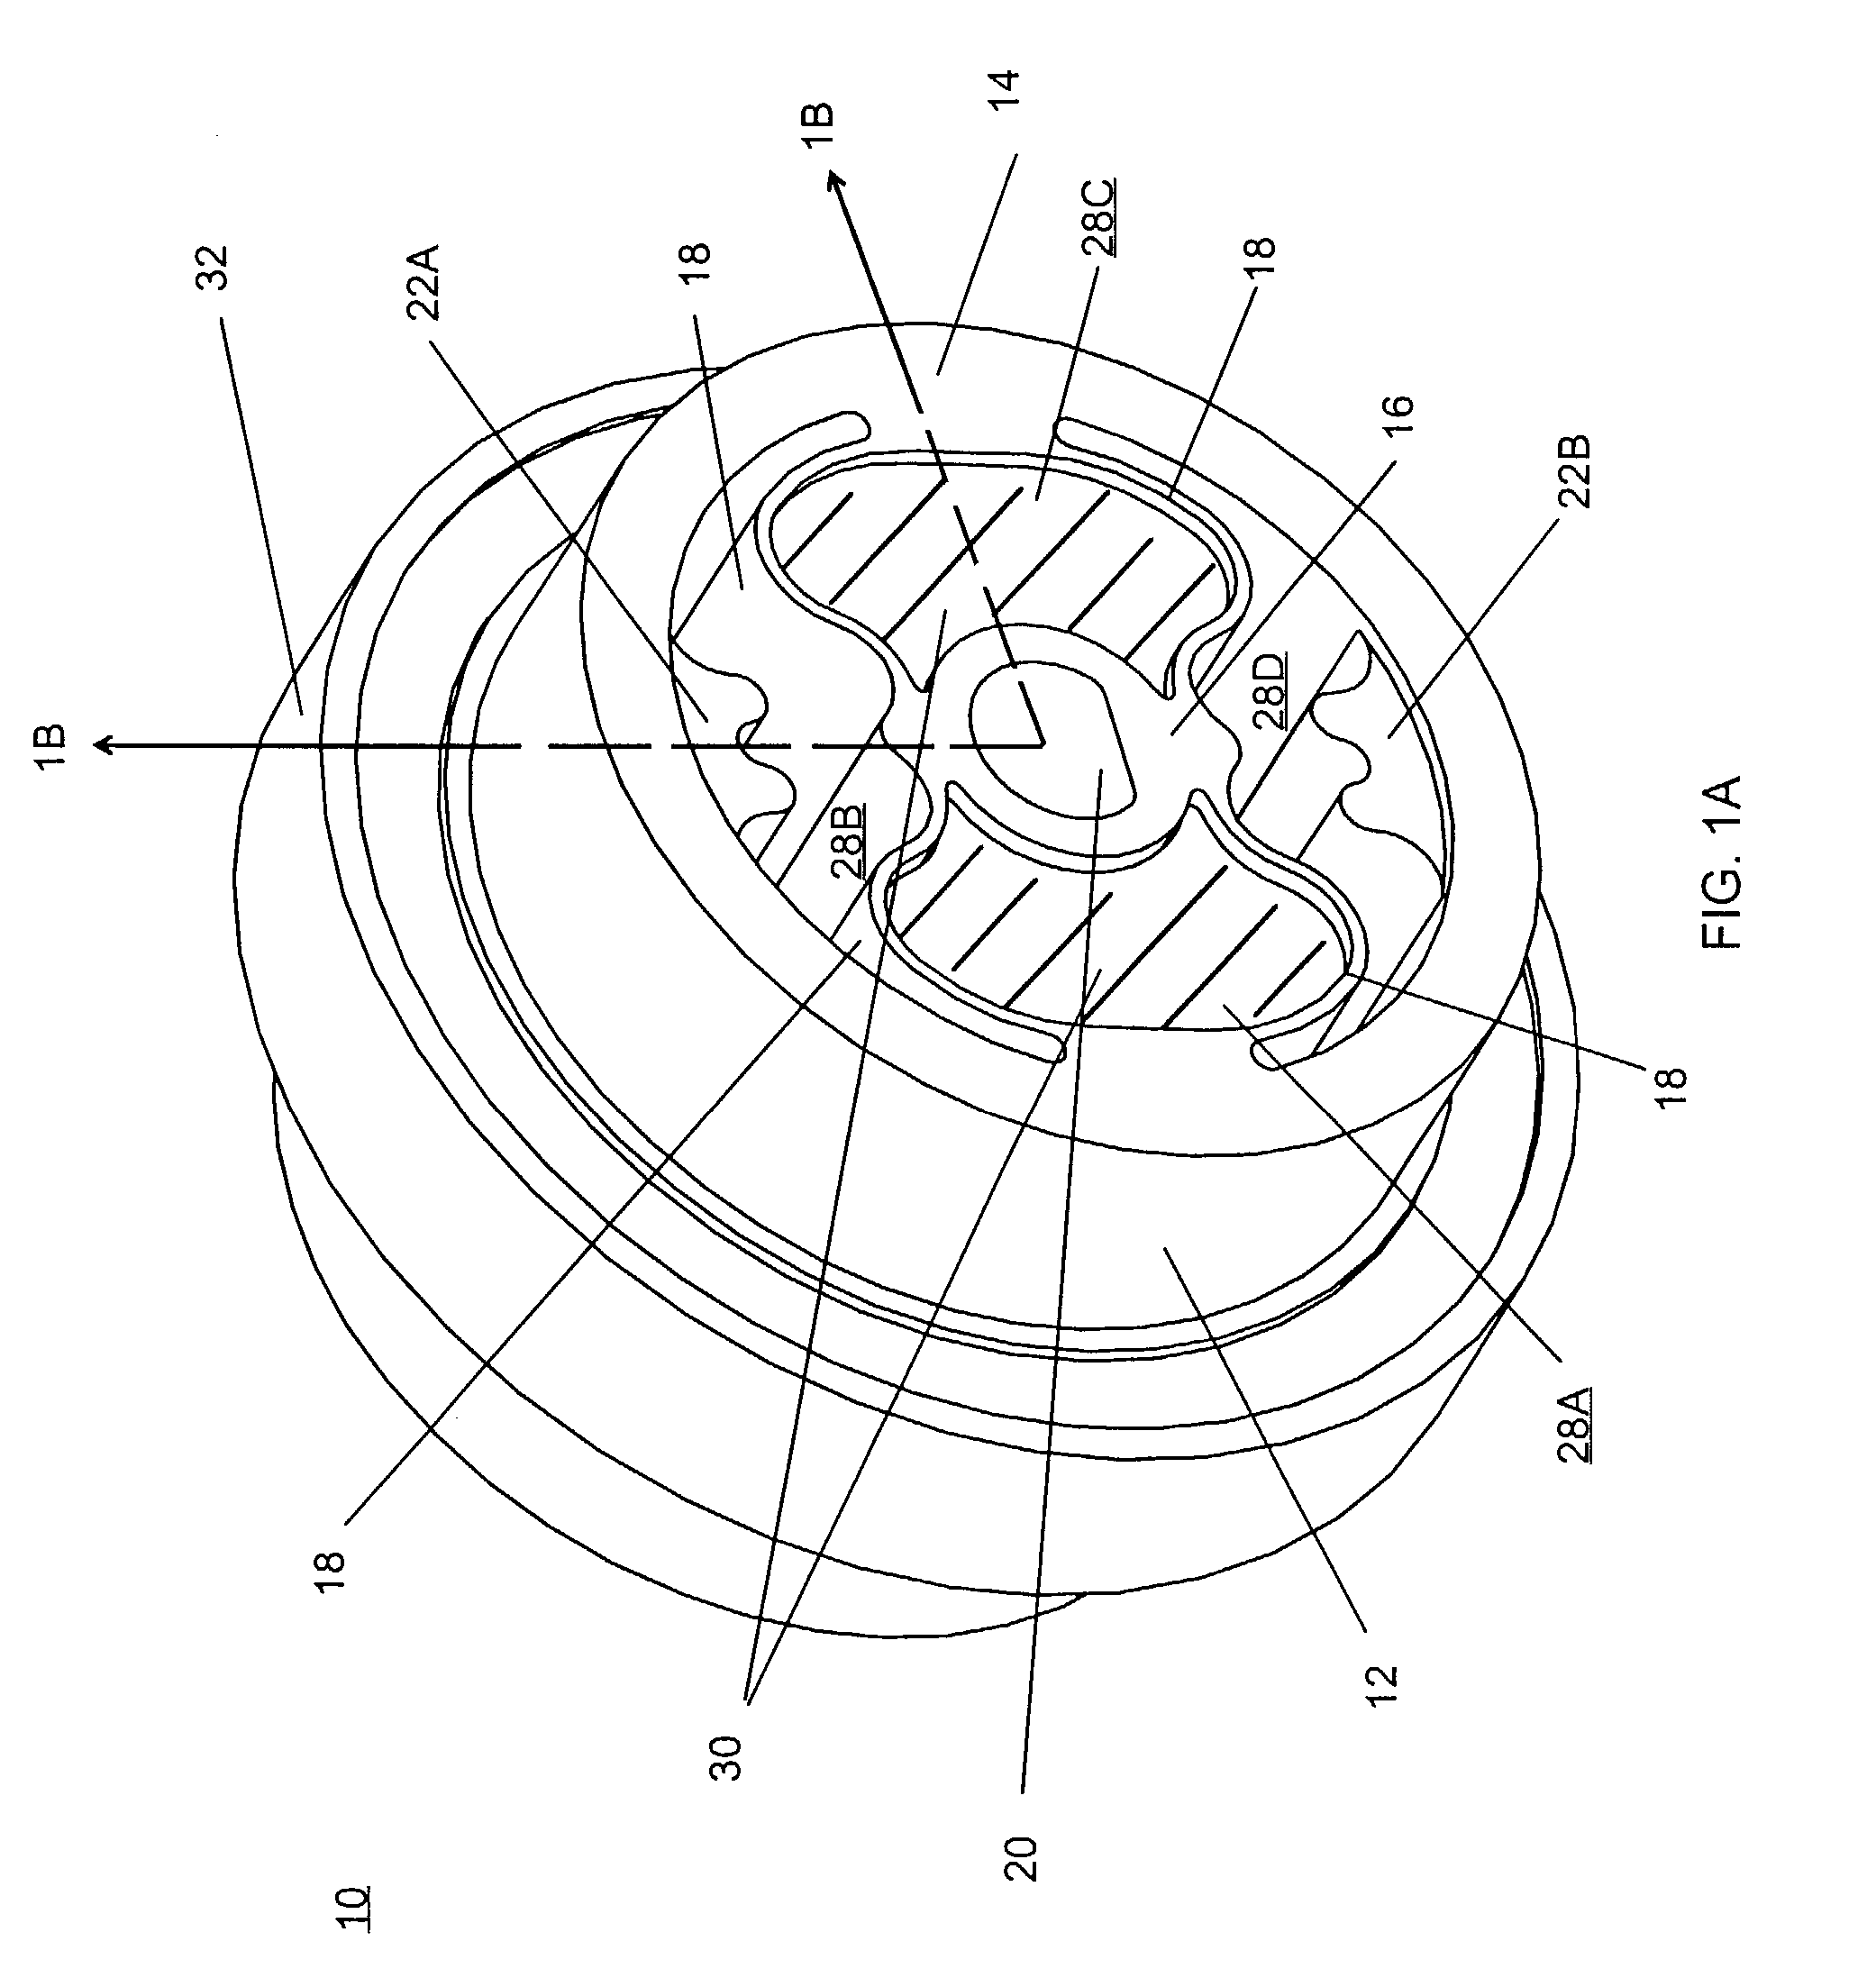 Compact shock absorption, vibration, isolation, and suspension device